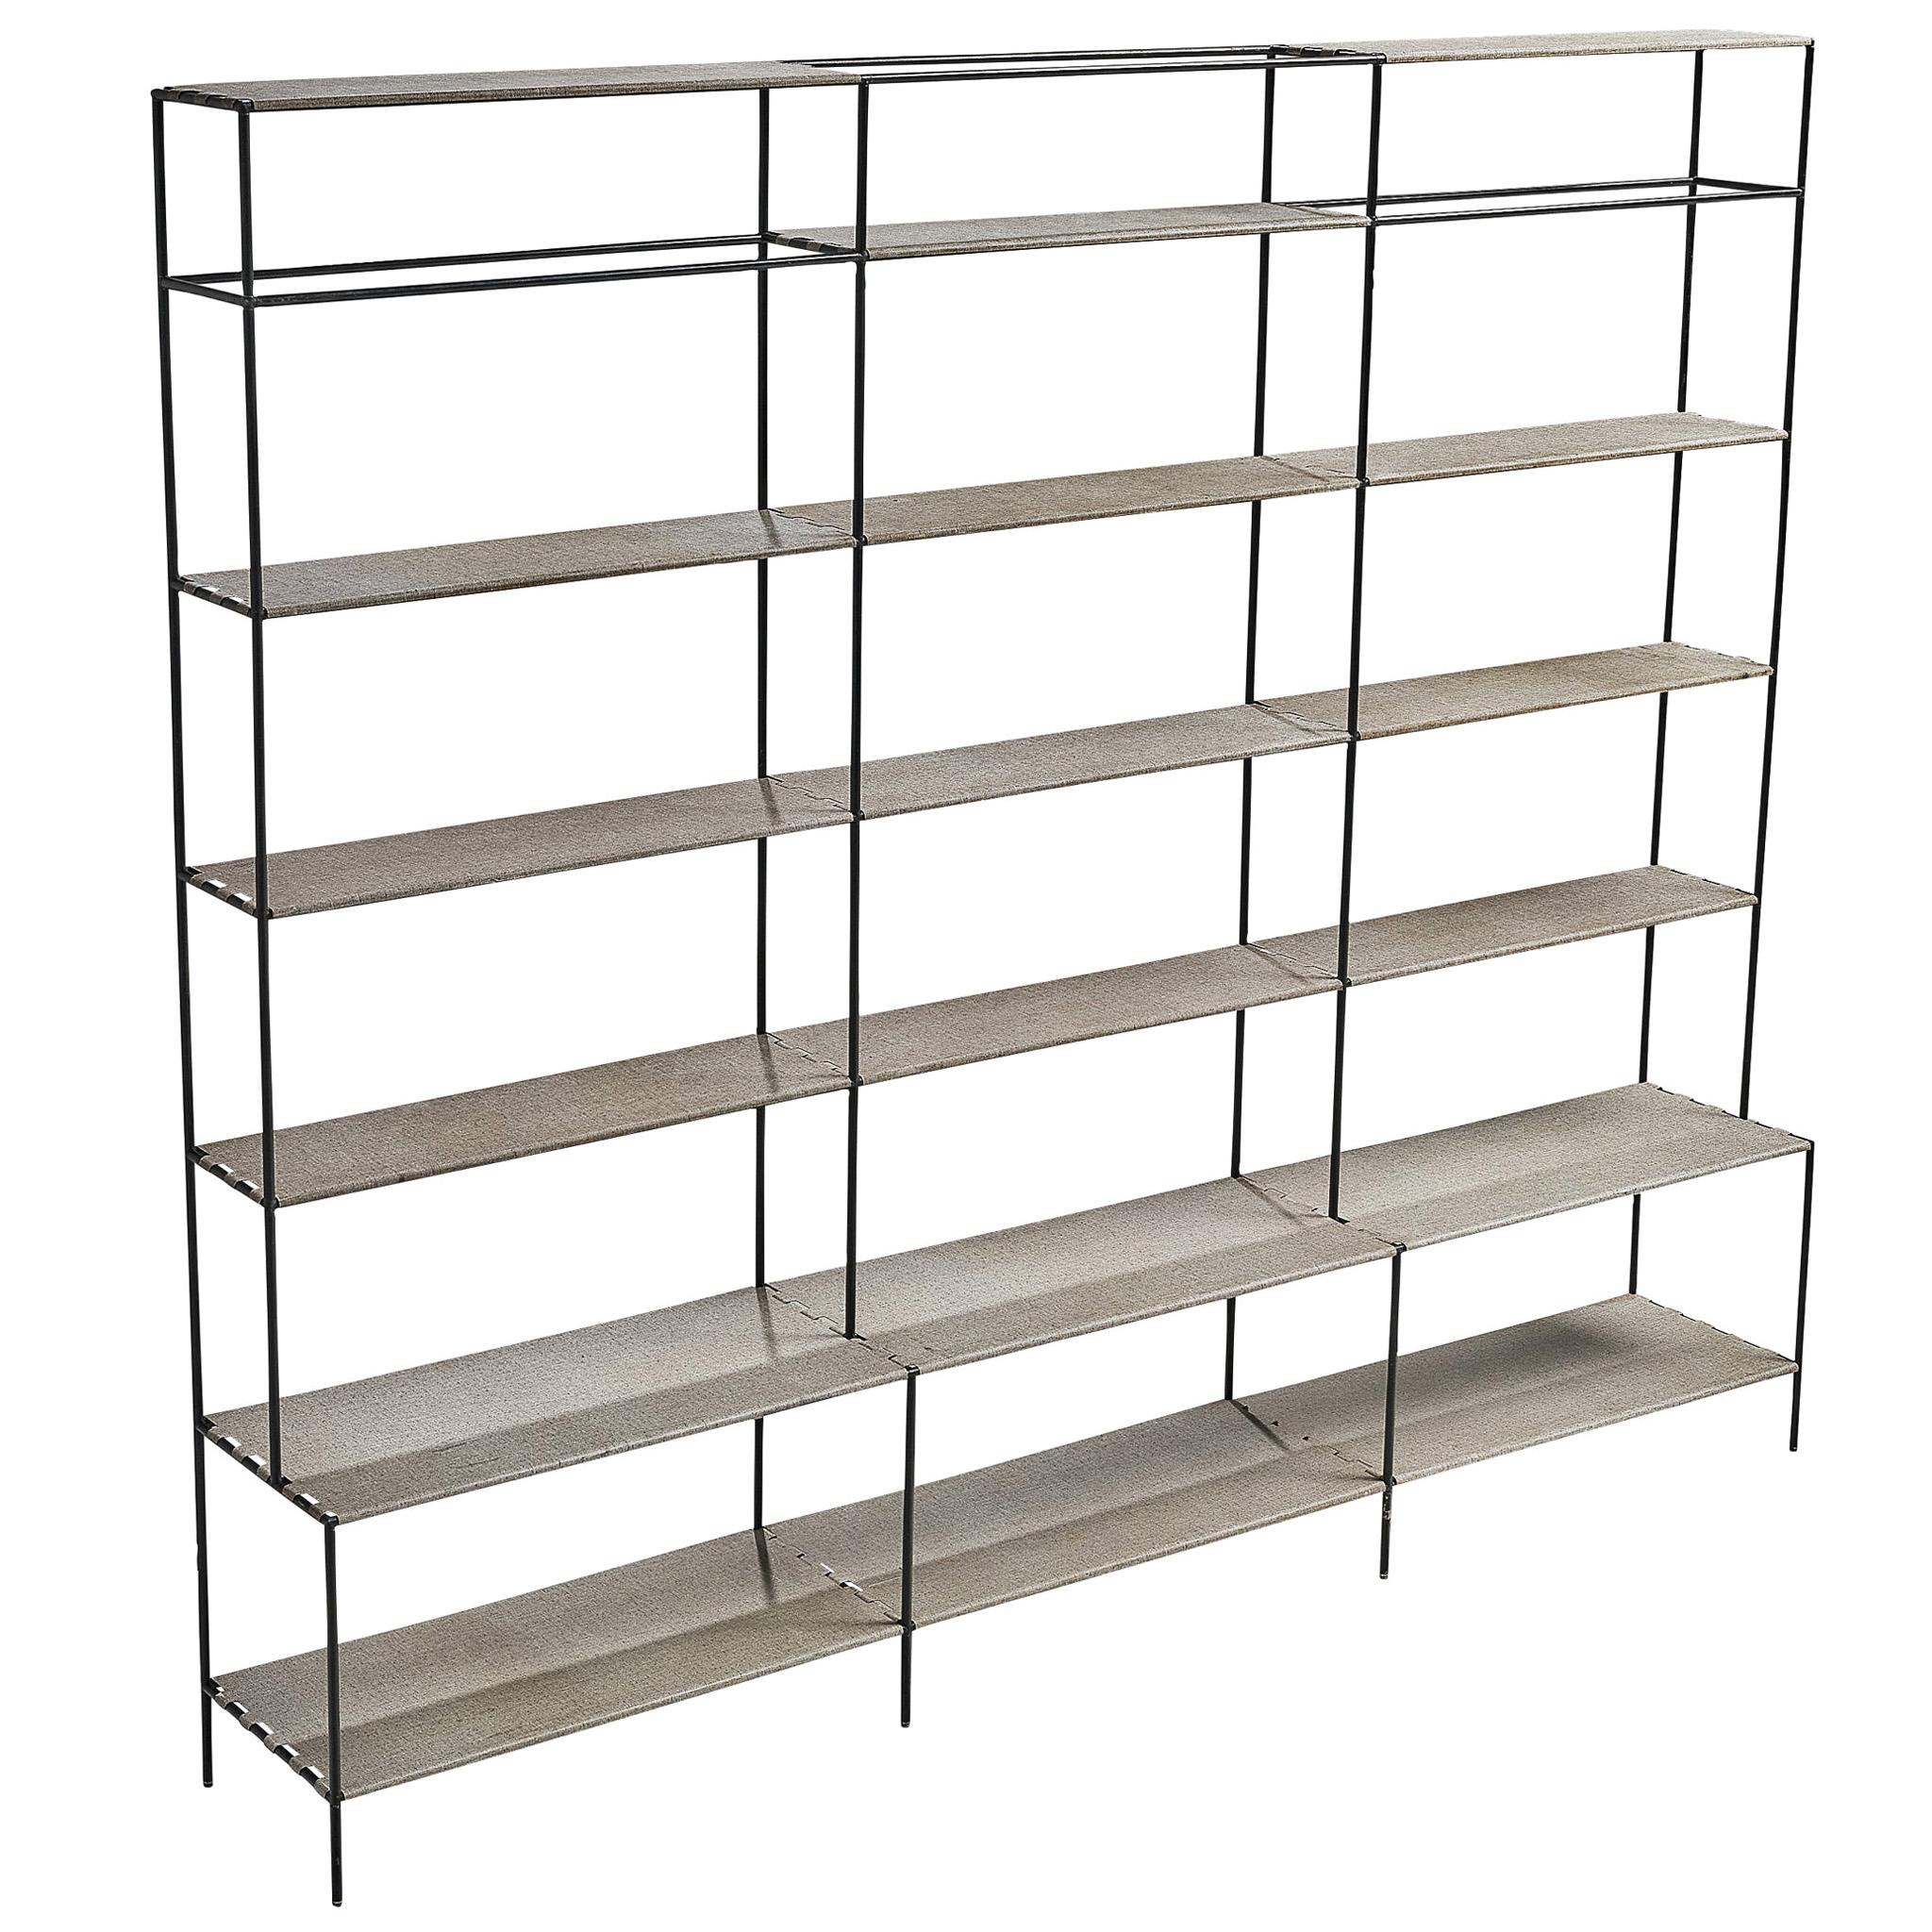 Poul Cadovius Open Shelving Unit or Room Divider